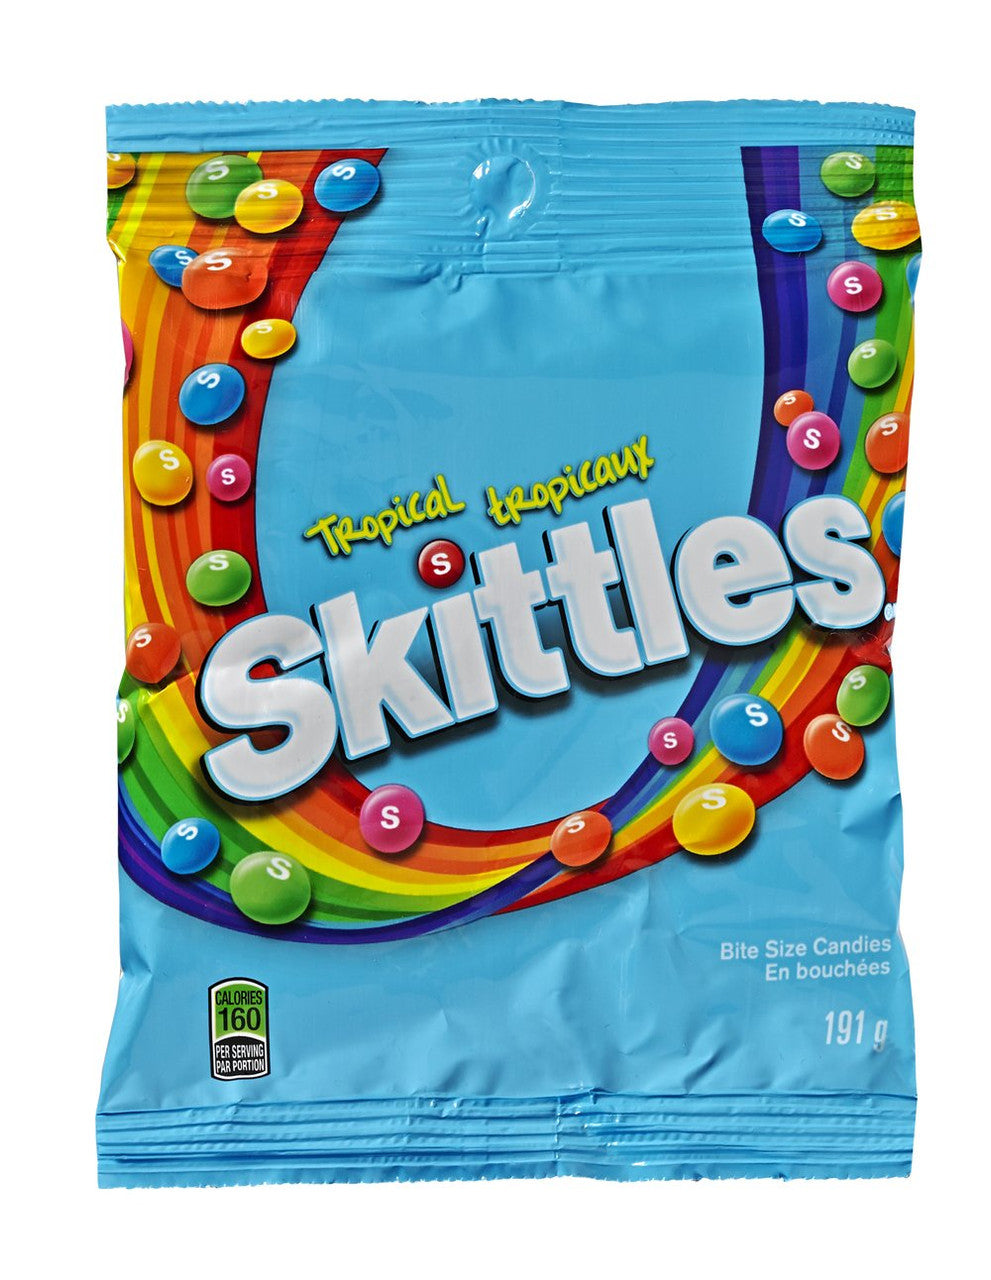 Skittles Tropical, Peg Bag, 191g 6.73oz 12ct  (Imported from Canada}